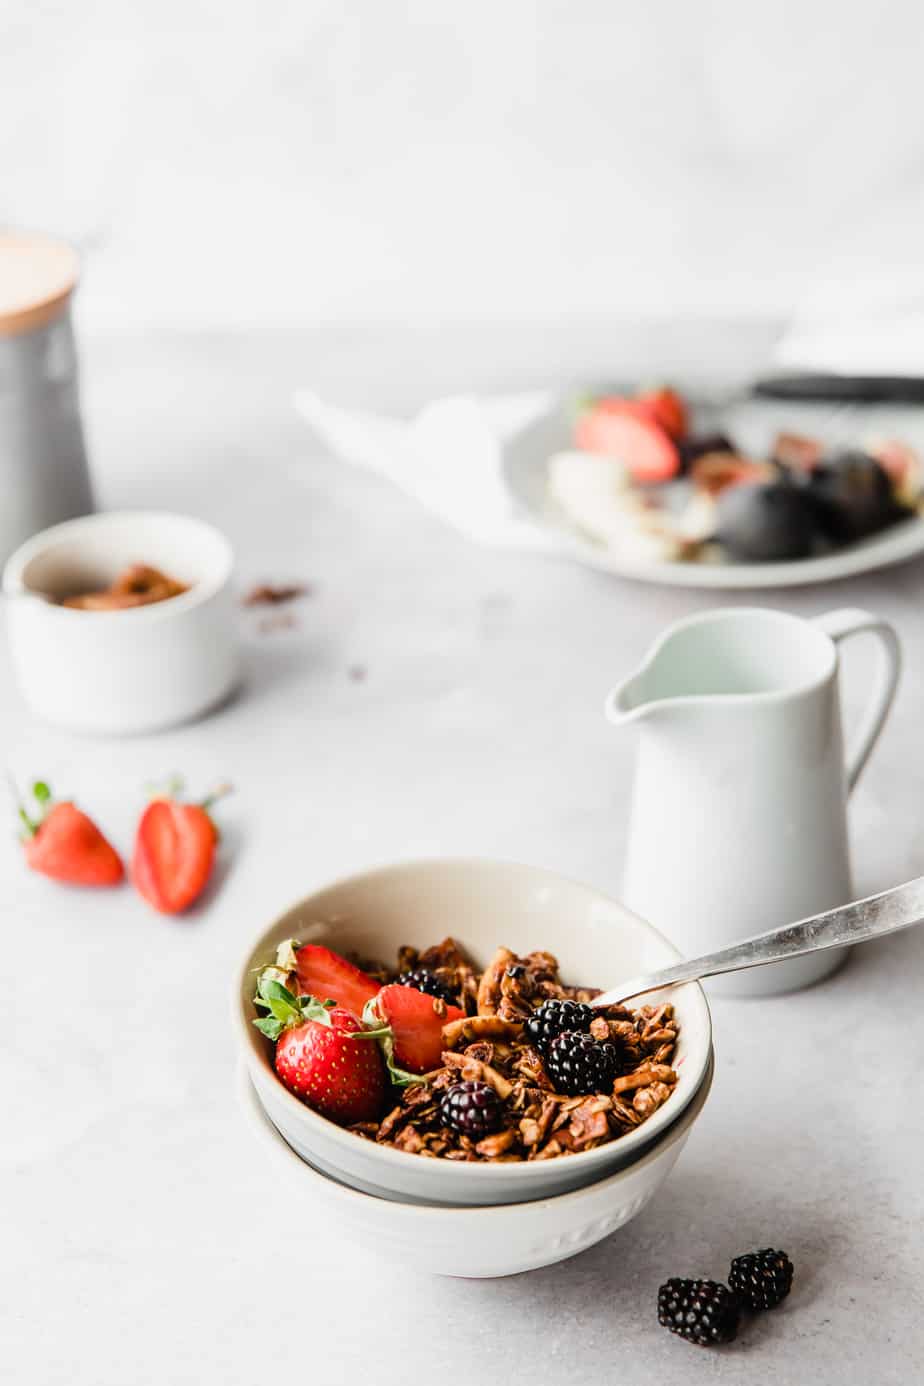 A white bowl filled with Crunchy Cinnamon Peanut Free Granola and fresh fruit with a silver spoon.